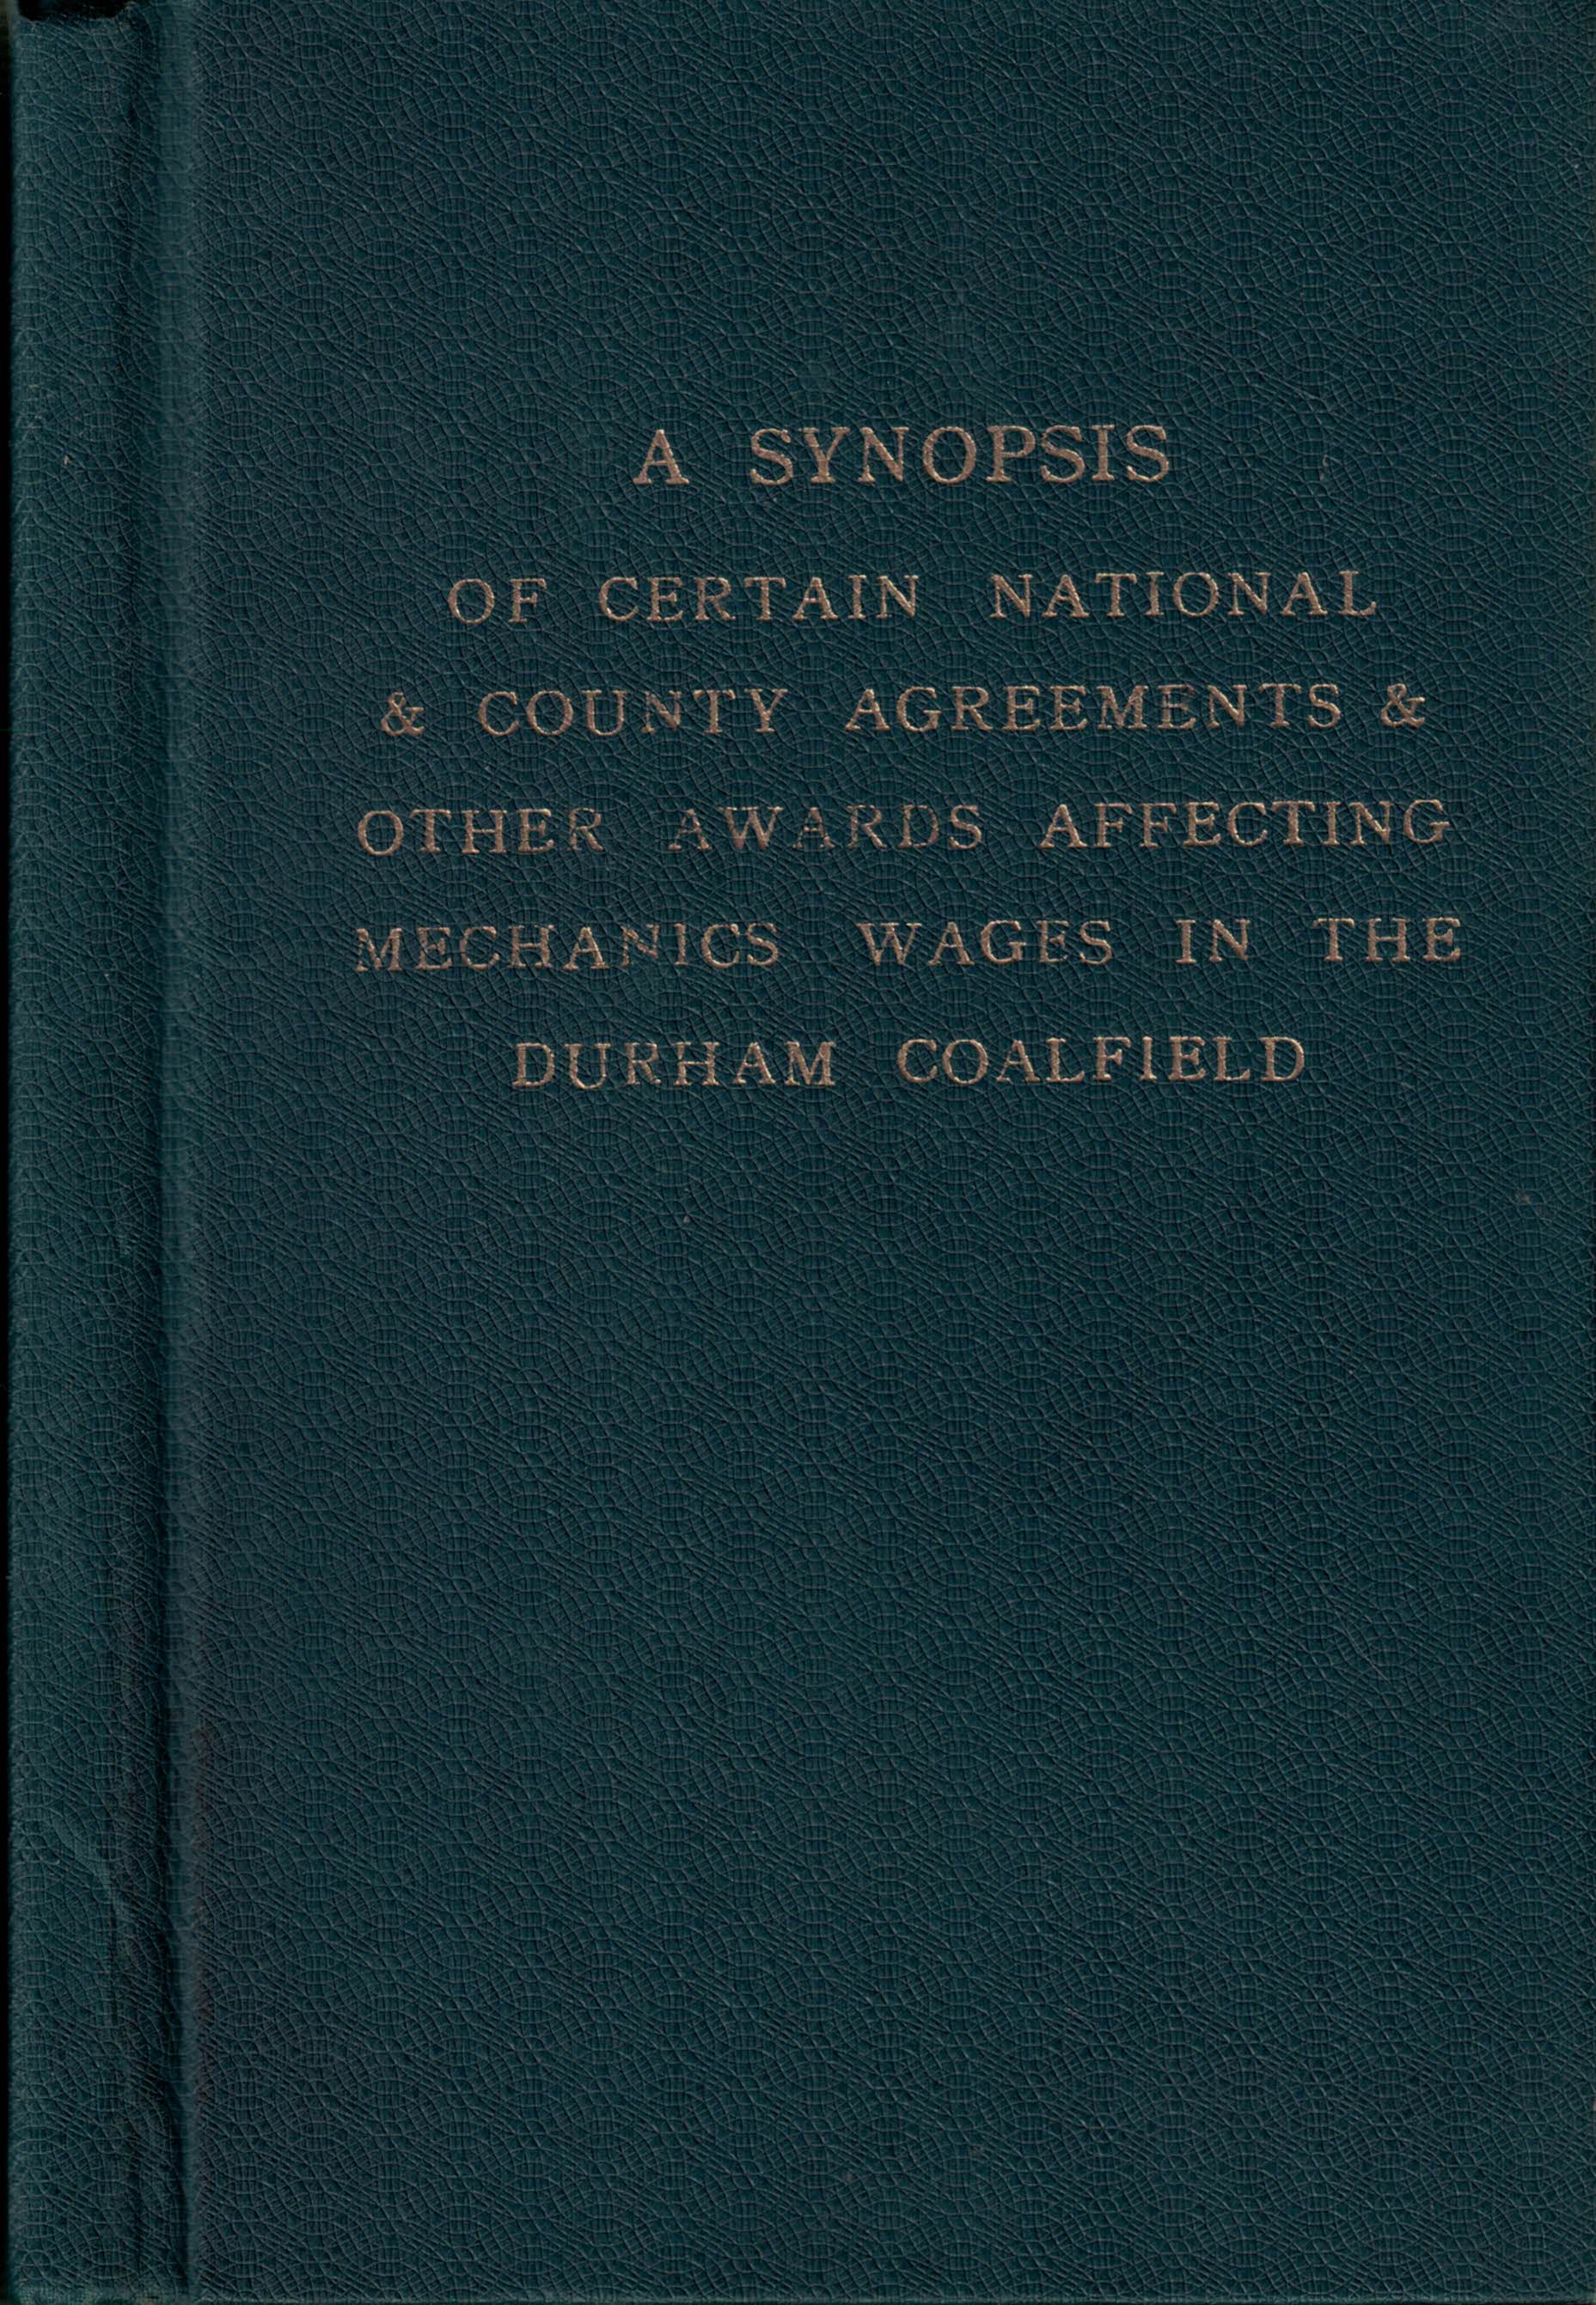 A Synopsis of Certain National & County Agreements & Other Awards Affecting Mechanics Wages in the Durham Coalfield